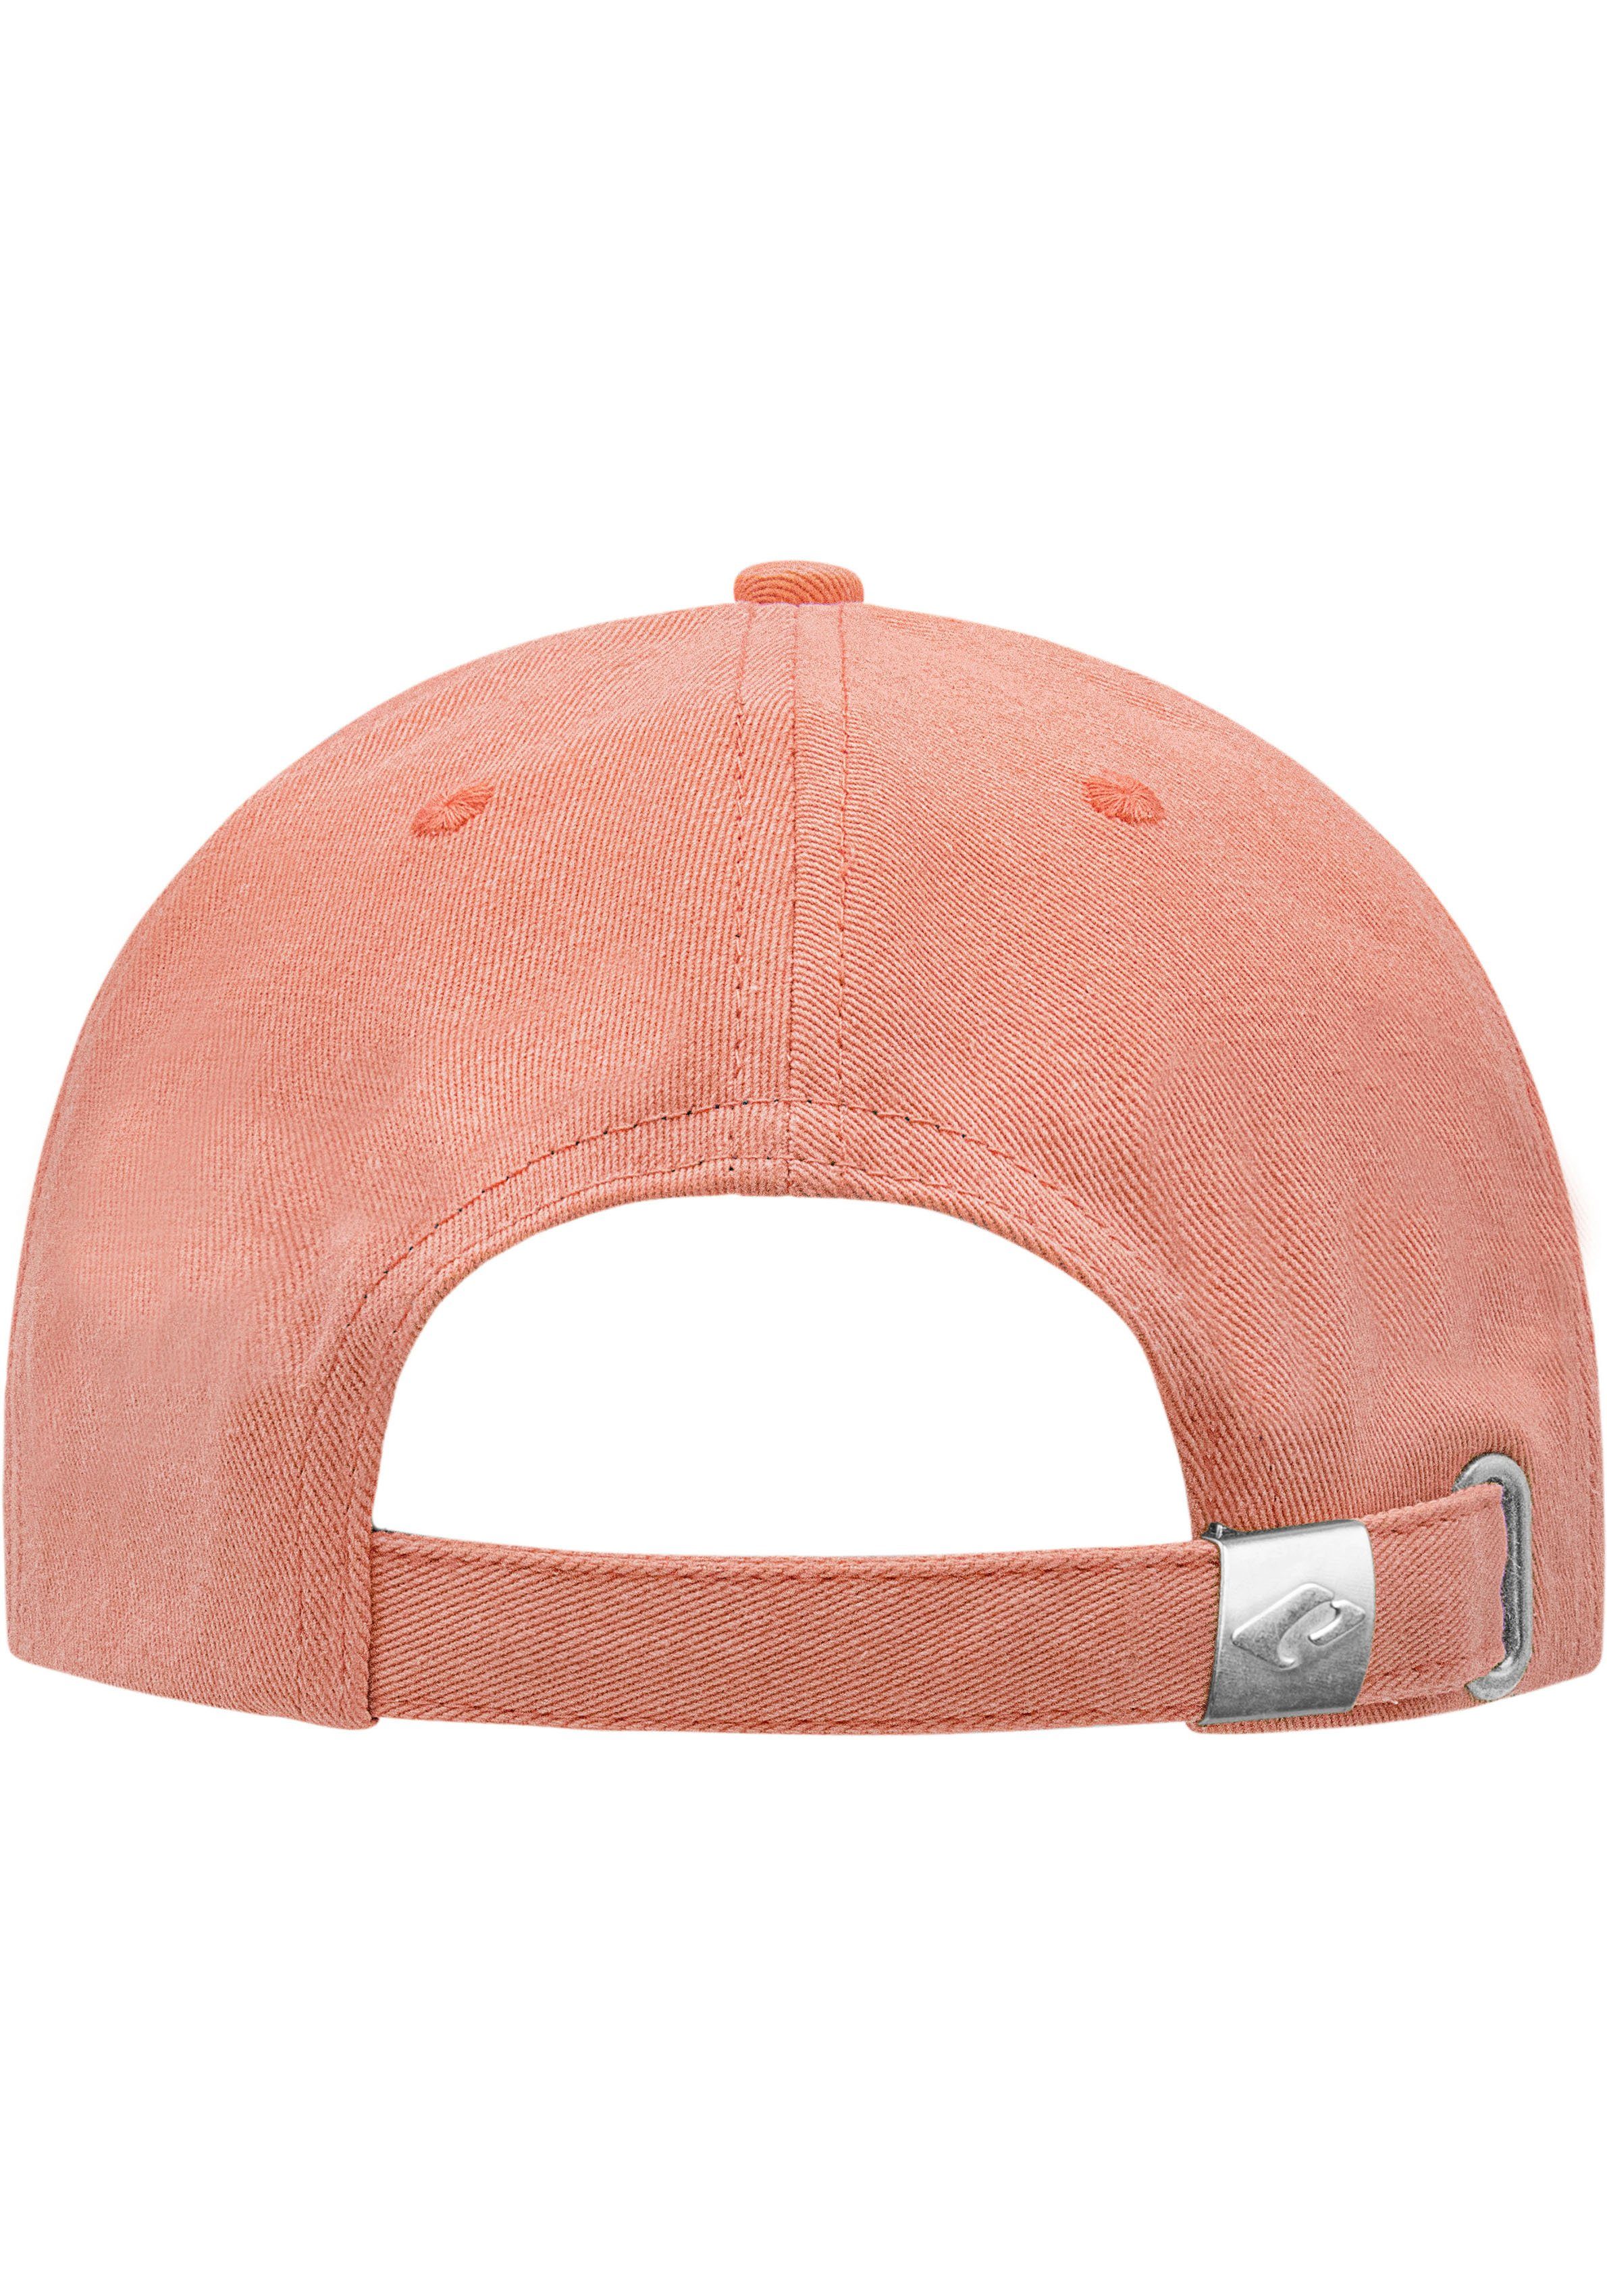 Arklow Hat chillouts Baseball coral Cap